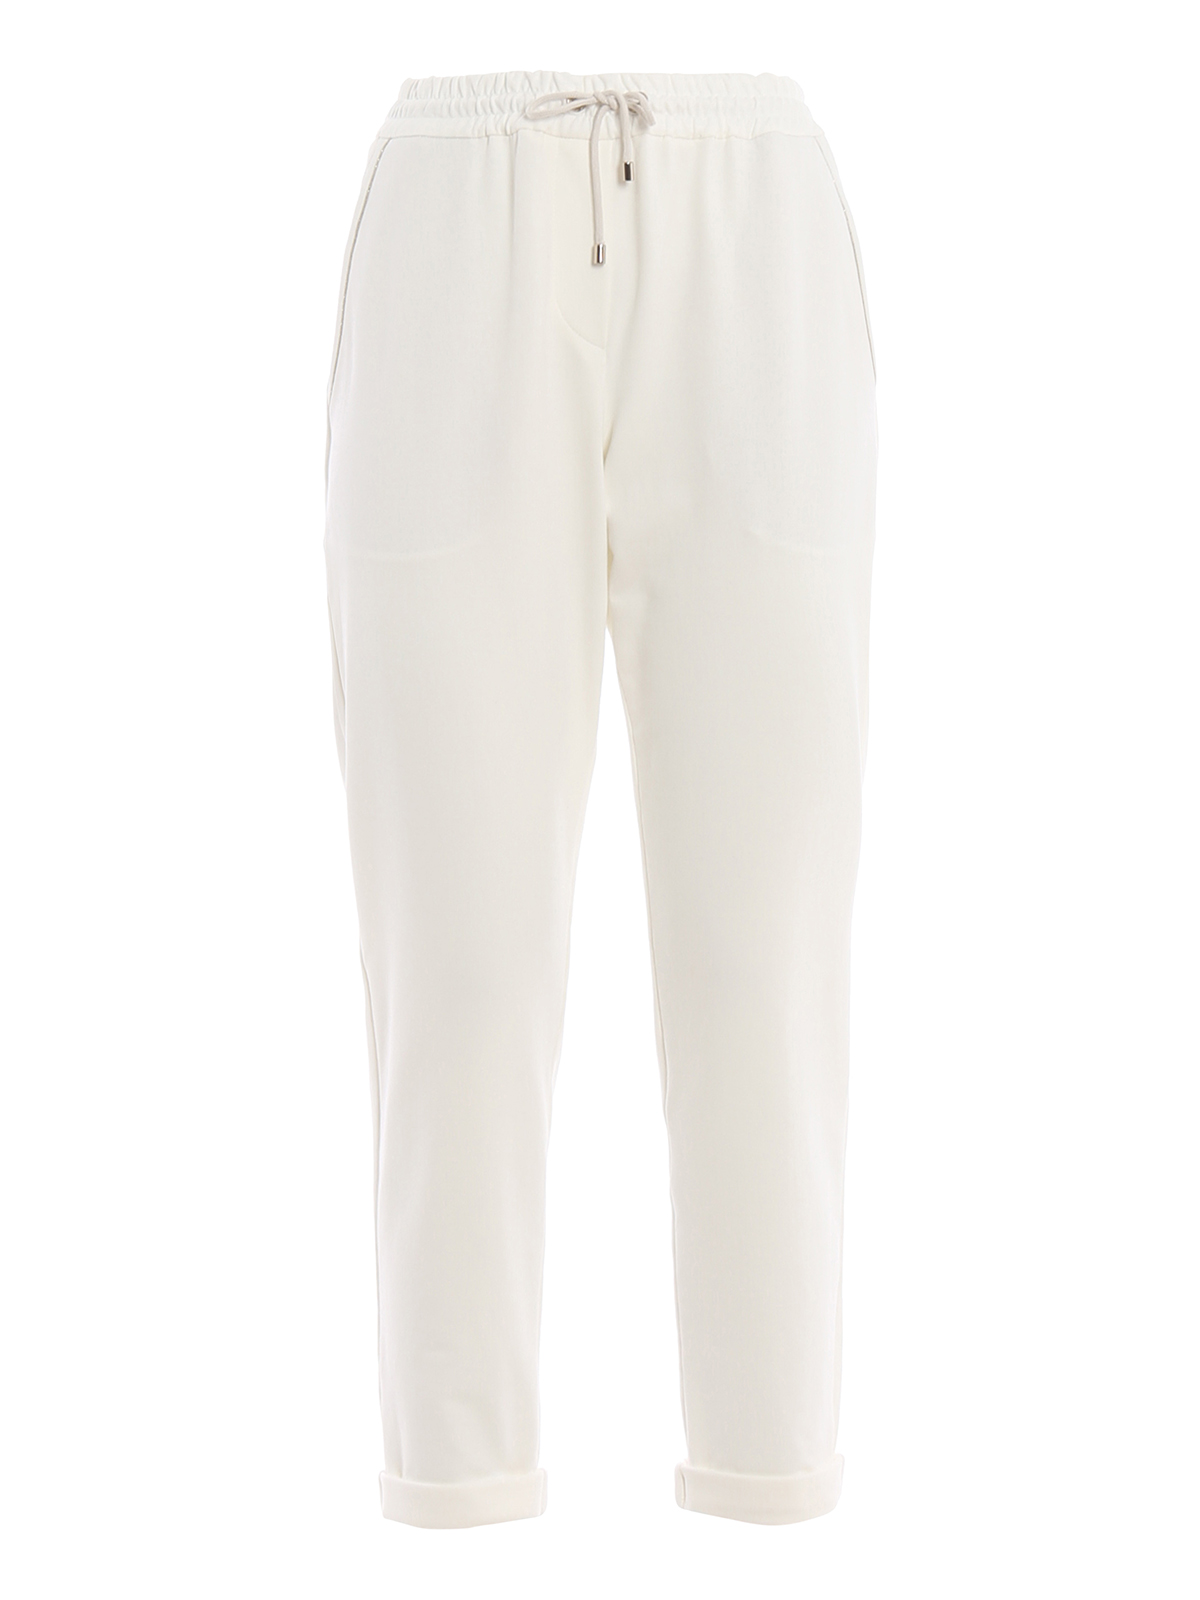 BRUNELLO CUCINELLI EMBELLISHED JOGGERS STYLE TROUSERS